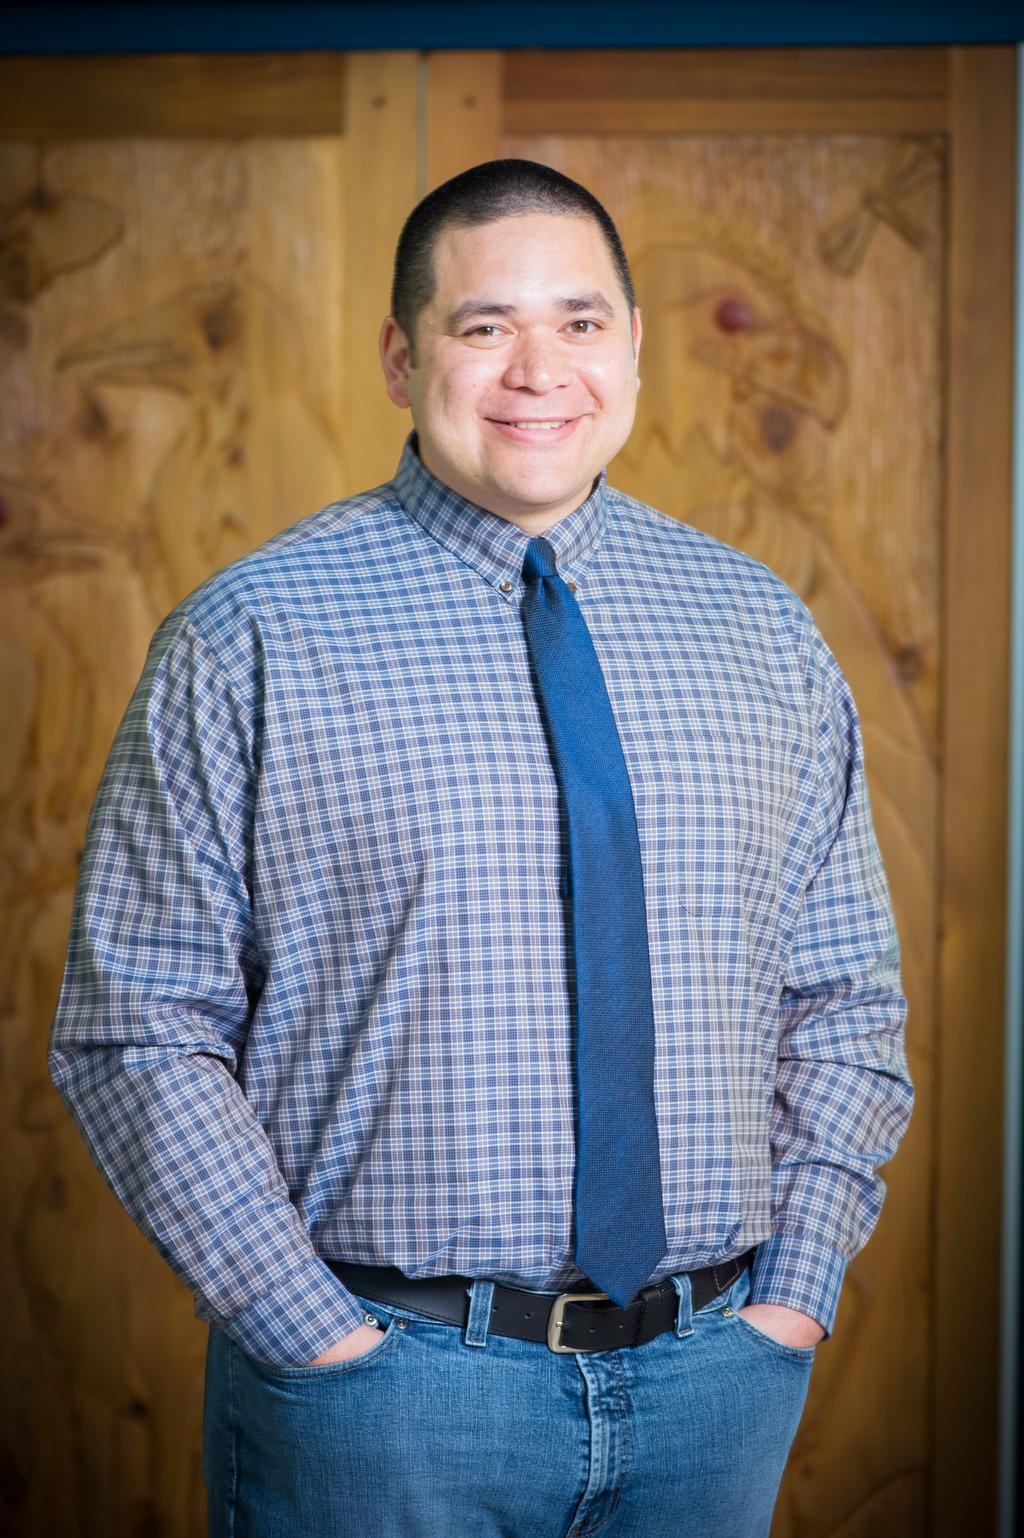 Dr. Alika Lafontaine Dr. Lafontaine is a prominent Indigenous physician and FNUniv alumnus. Dr. Lafontaine is the Medical Lead for Aboriginal Health Program (North Zone) and an Anesthesiologist for Albert Health Services.